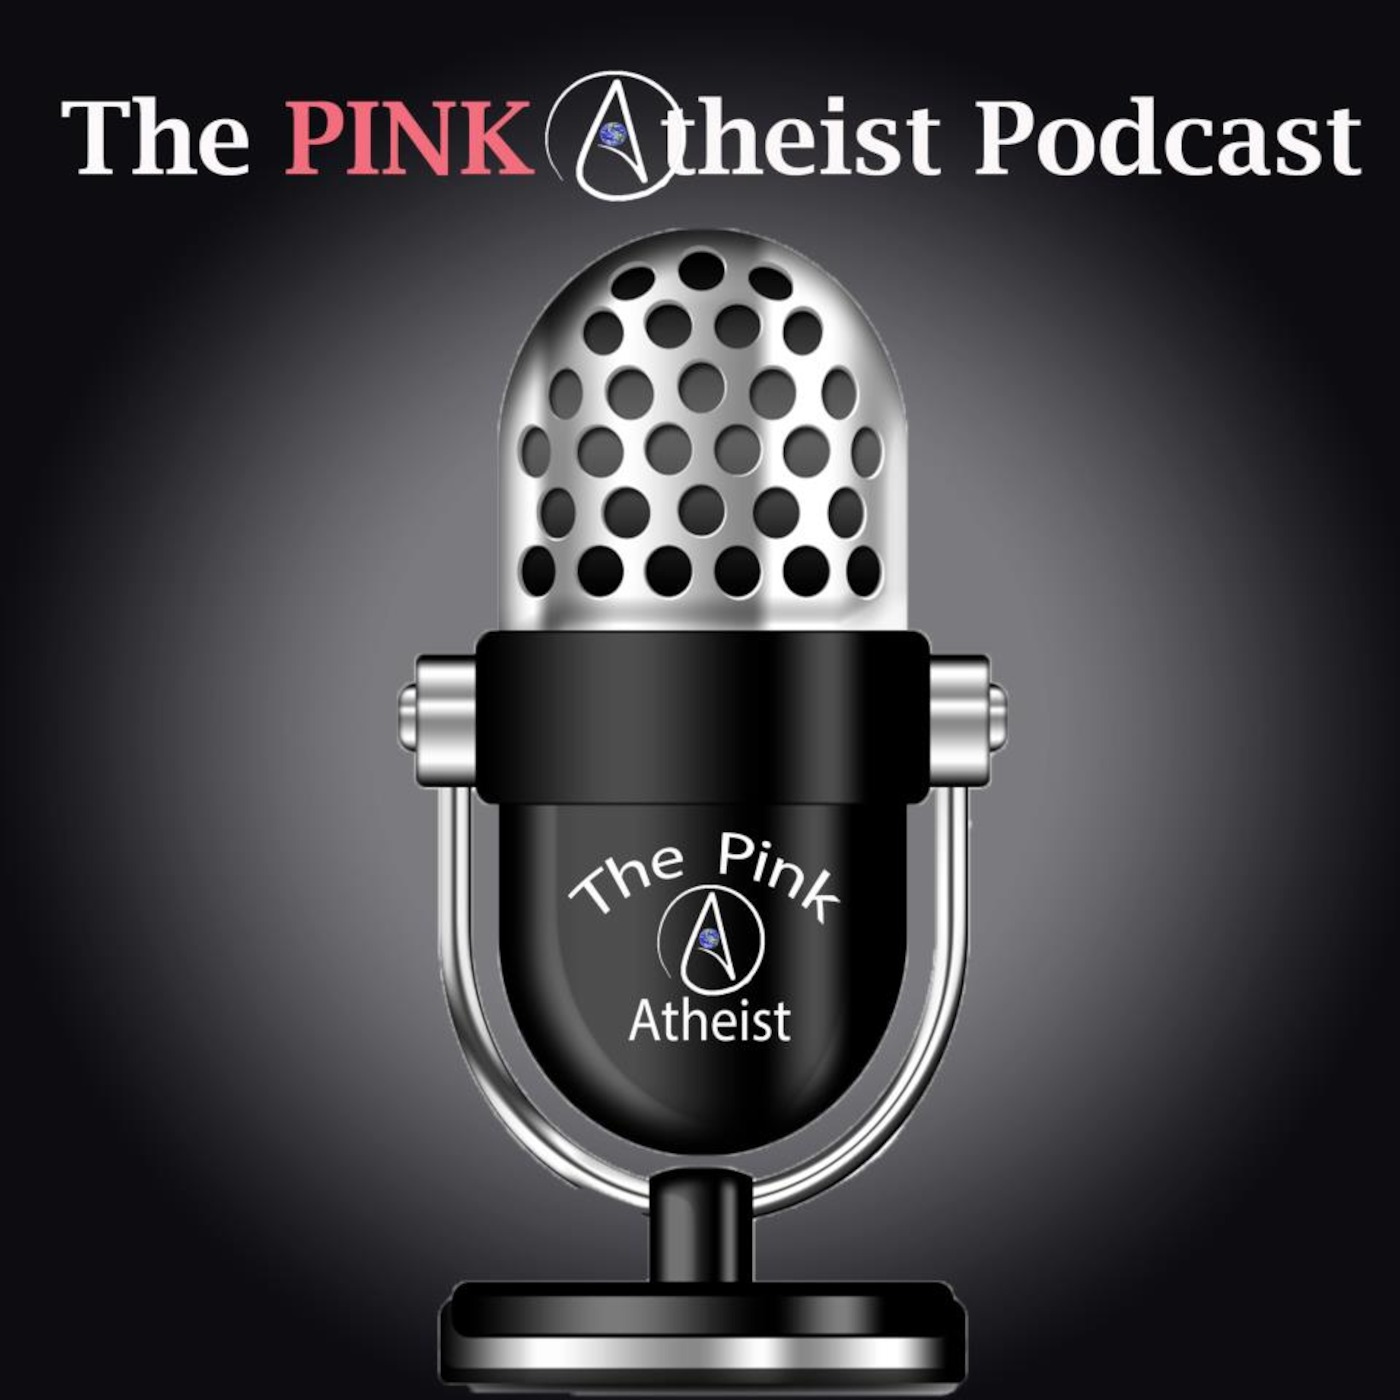 The Pink Atheist Podcast